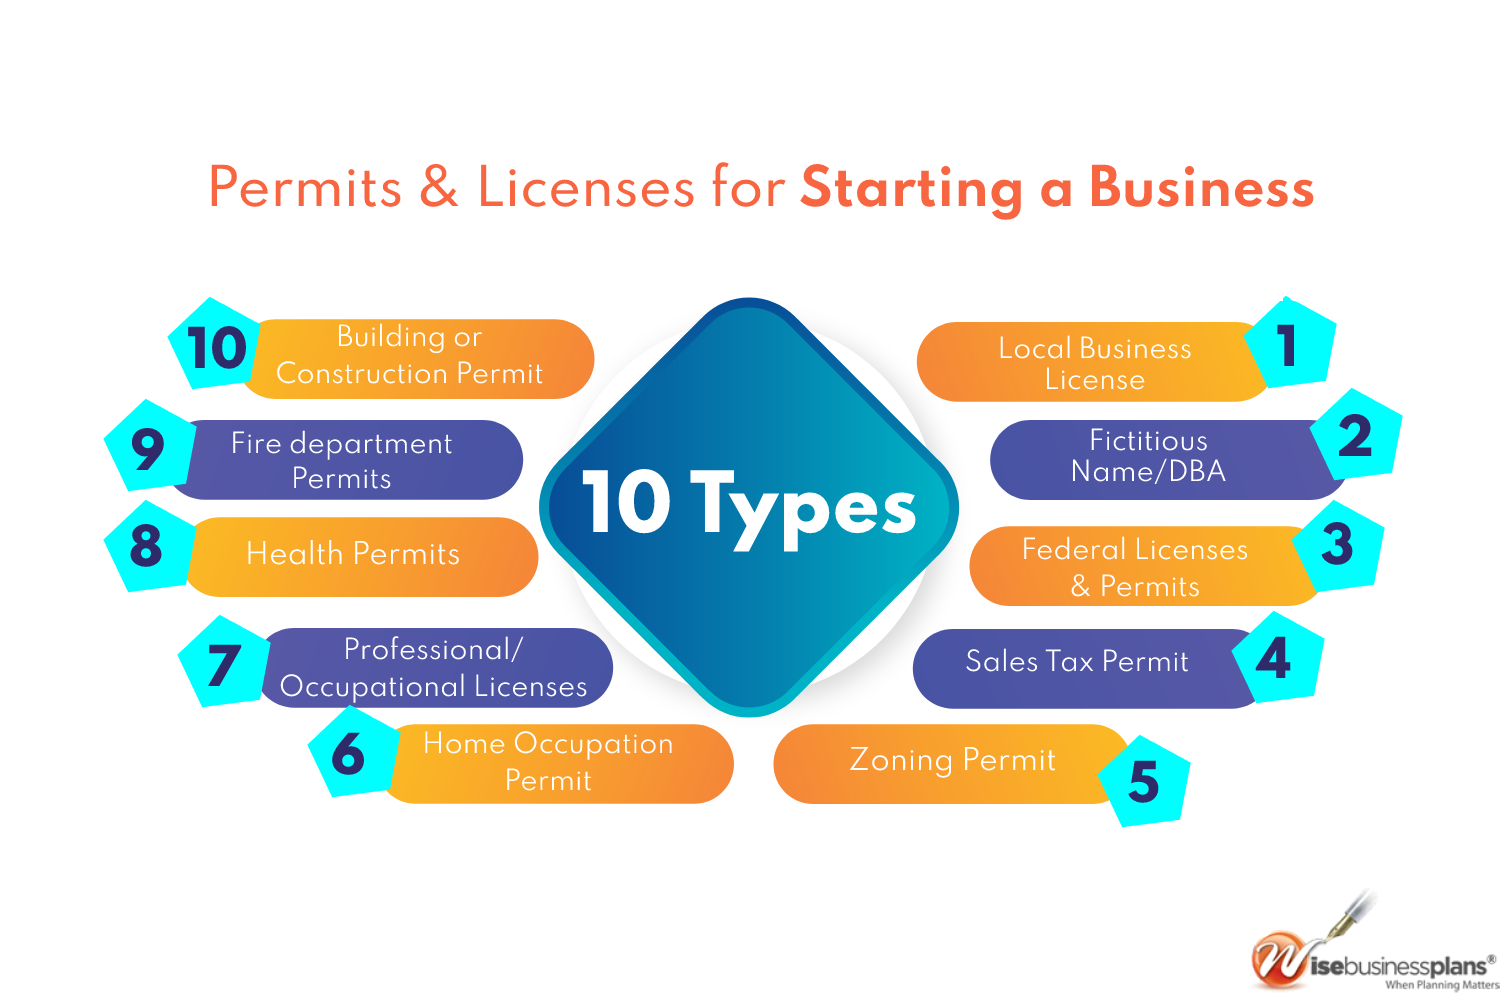 Permits & licenses for starting a business